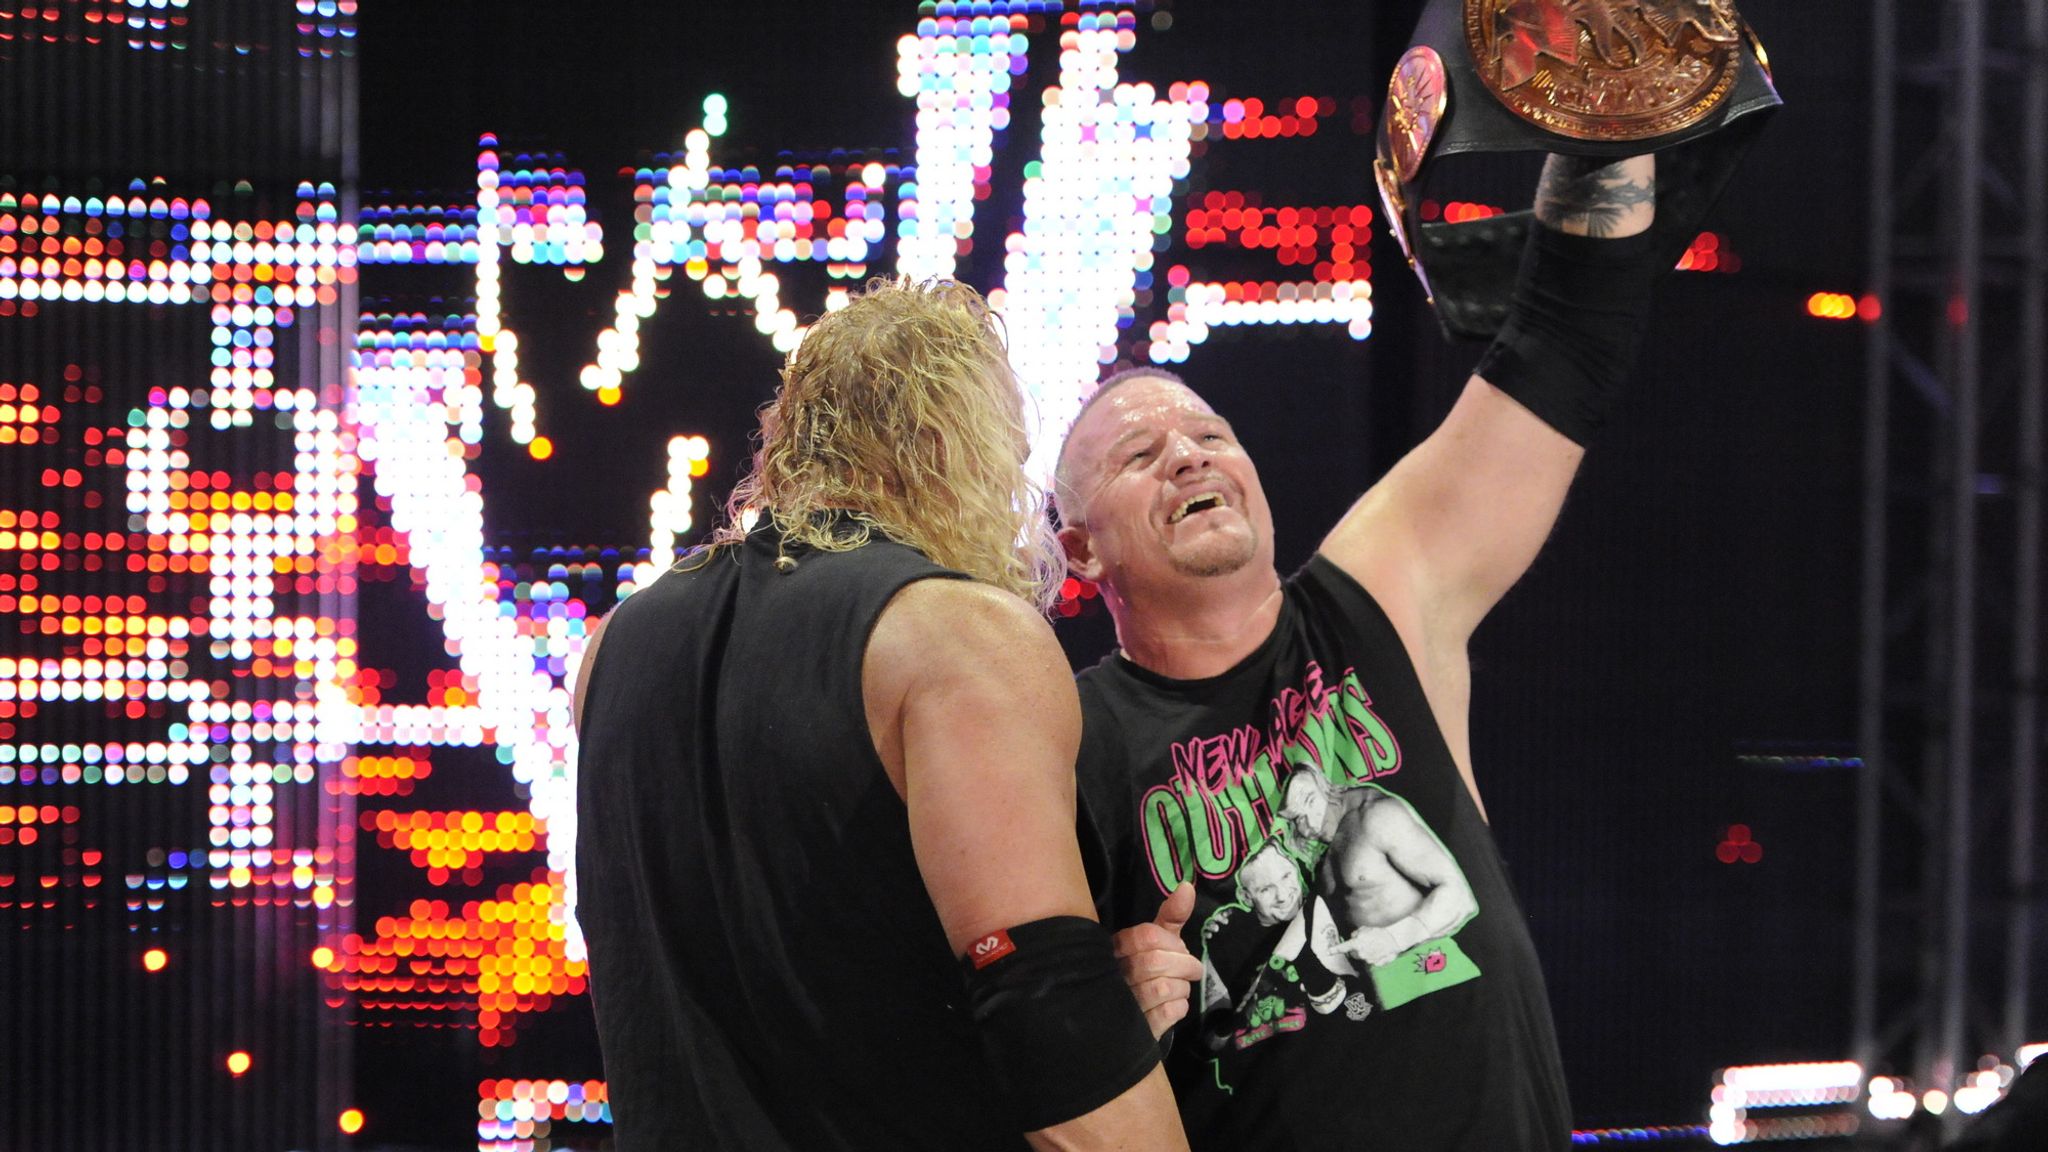 Wwe Royal Rumble 2014 New Age Outlaws And Brock Lesnar Made Waves In Pittsburgh Sky Sports